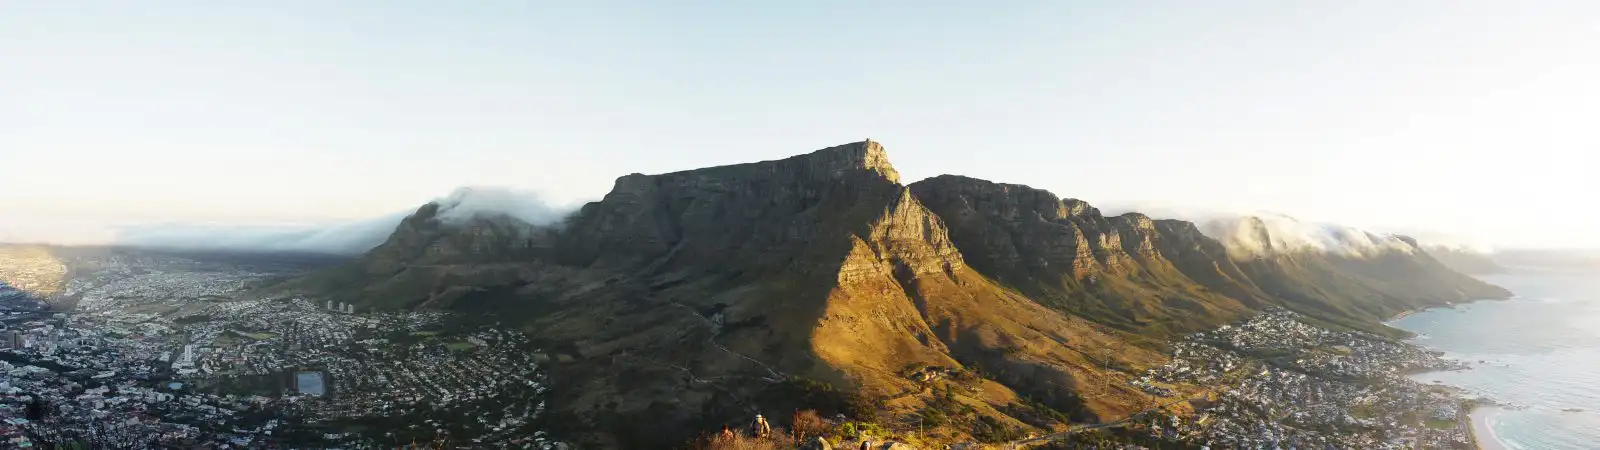 Rock Climbing in South Africa: What are the Best Spots? post image